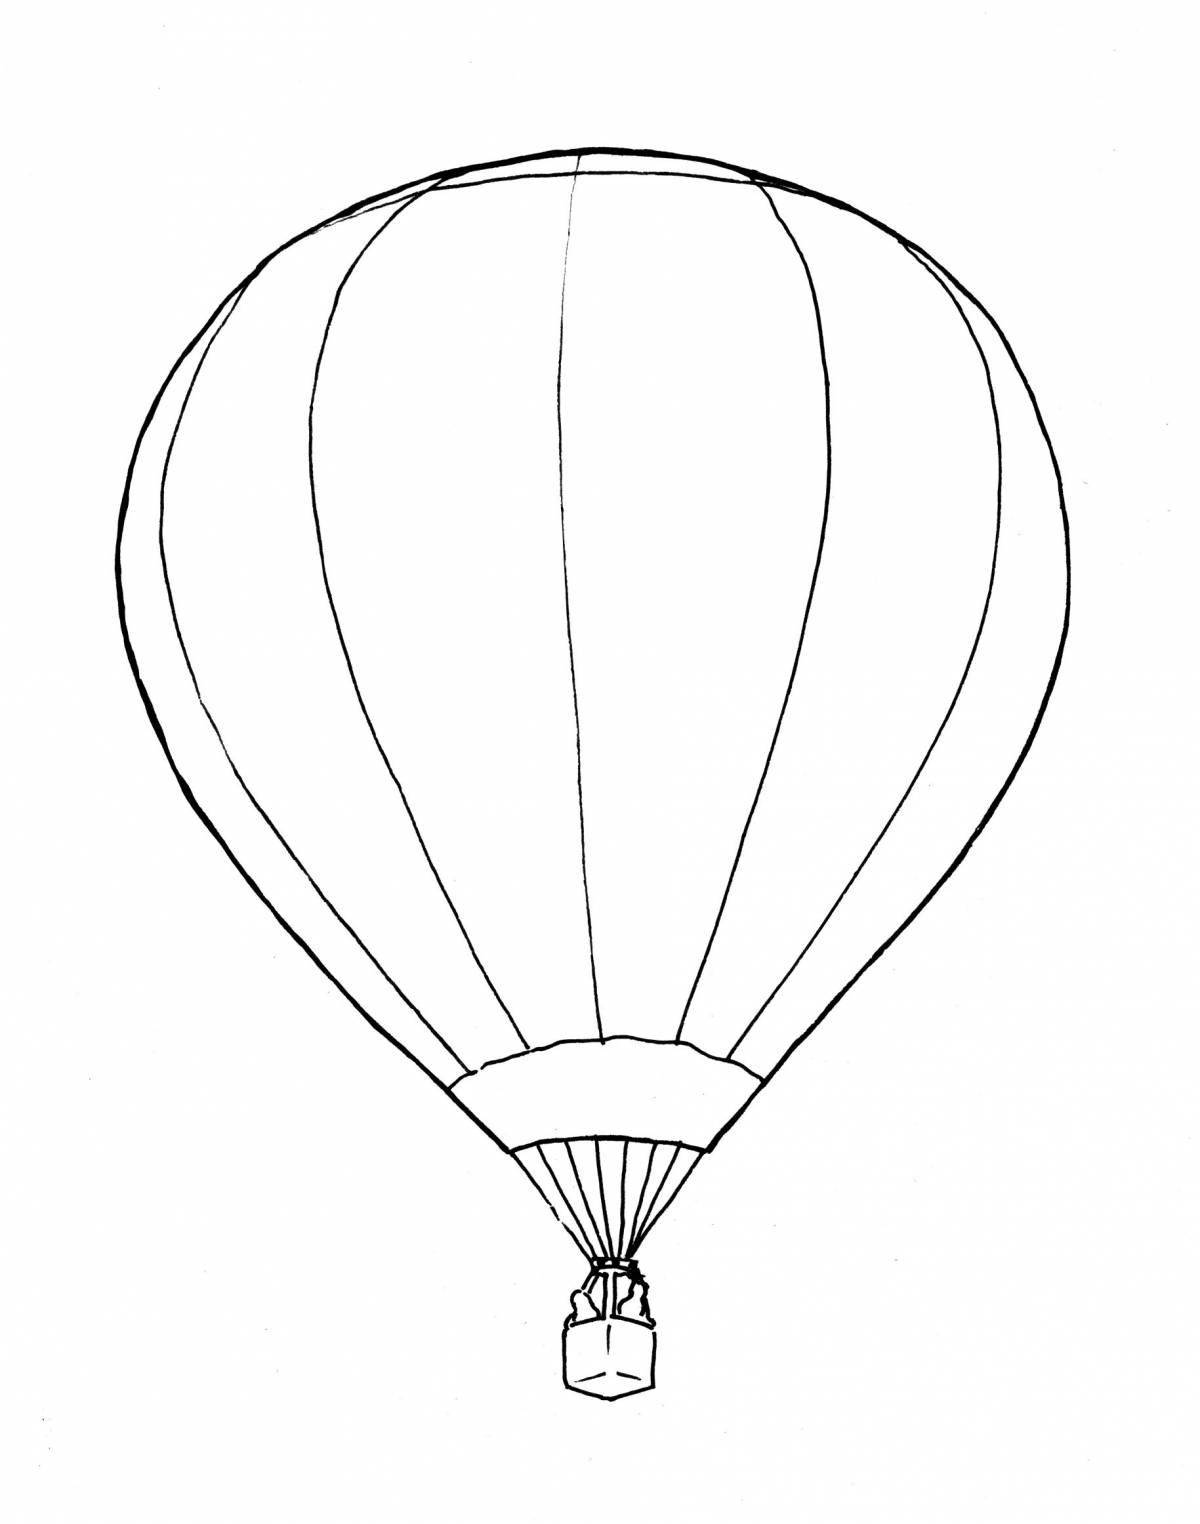 Coloring book funny balloon with a basket for children